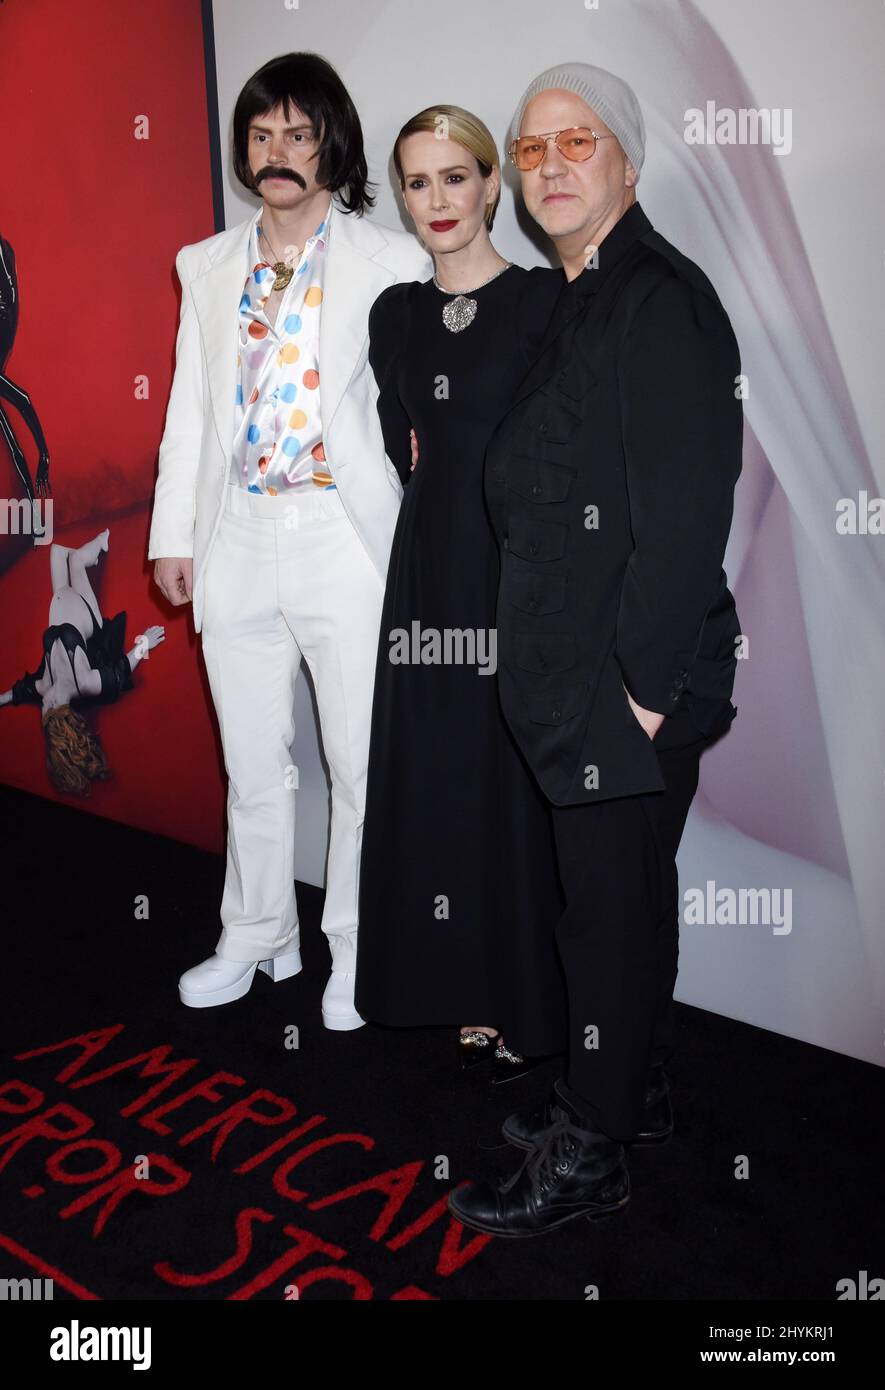 Evan Peters, Sarah Paulson and Ryan Murphy at FX's 'American Horror Story' 100 Episodes Celebration held at the Hollywood Forever Cemetery on October 26, 2019 in Hollywood, USA. Stock Photo